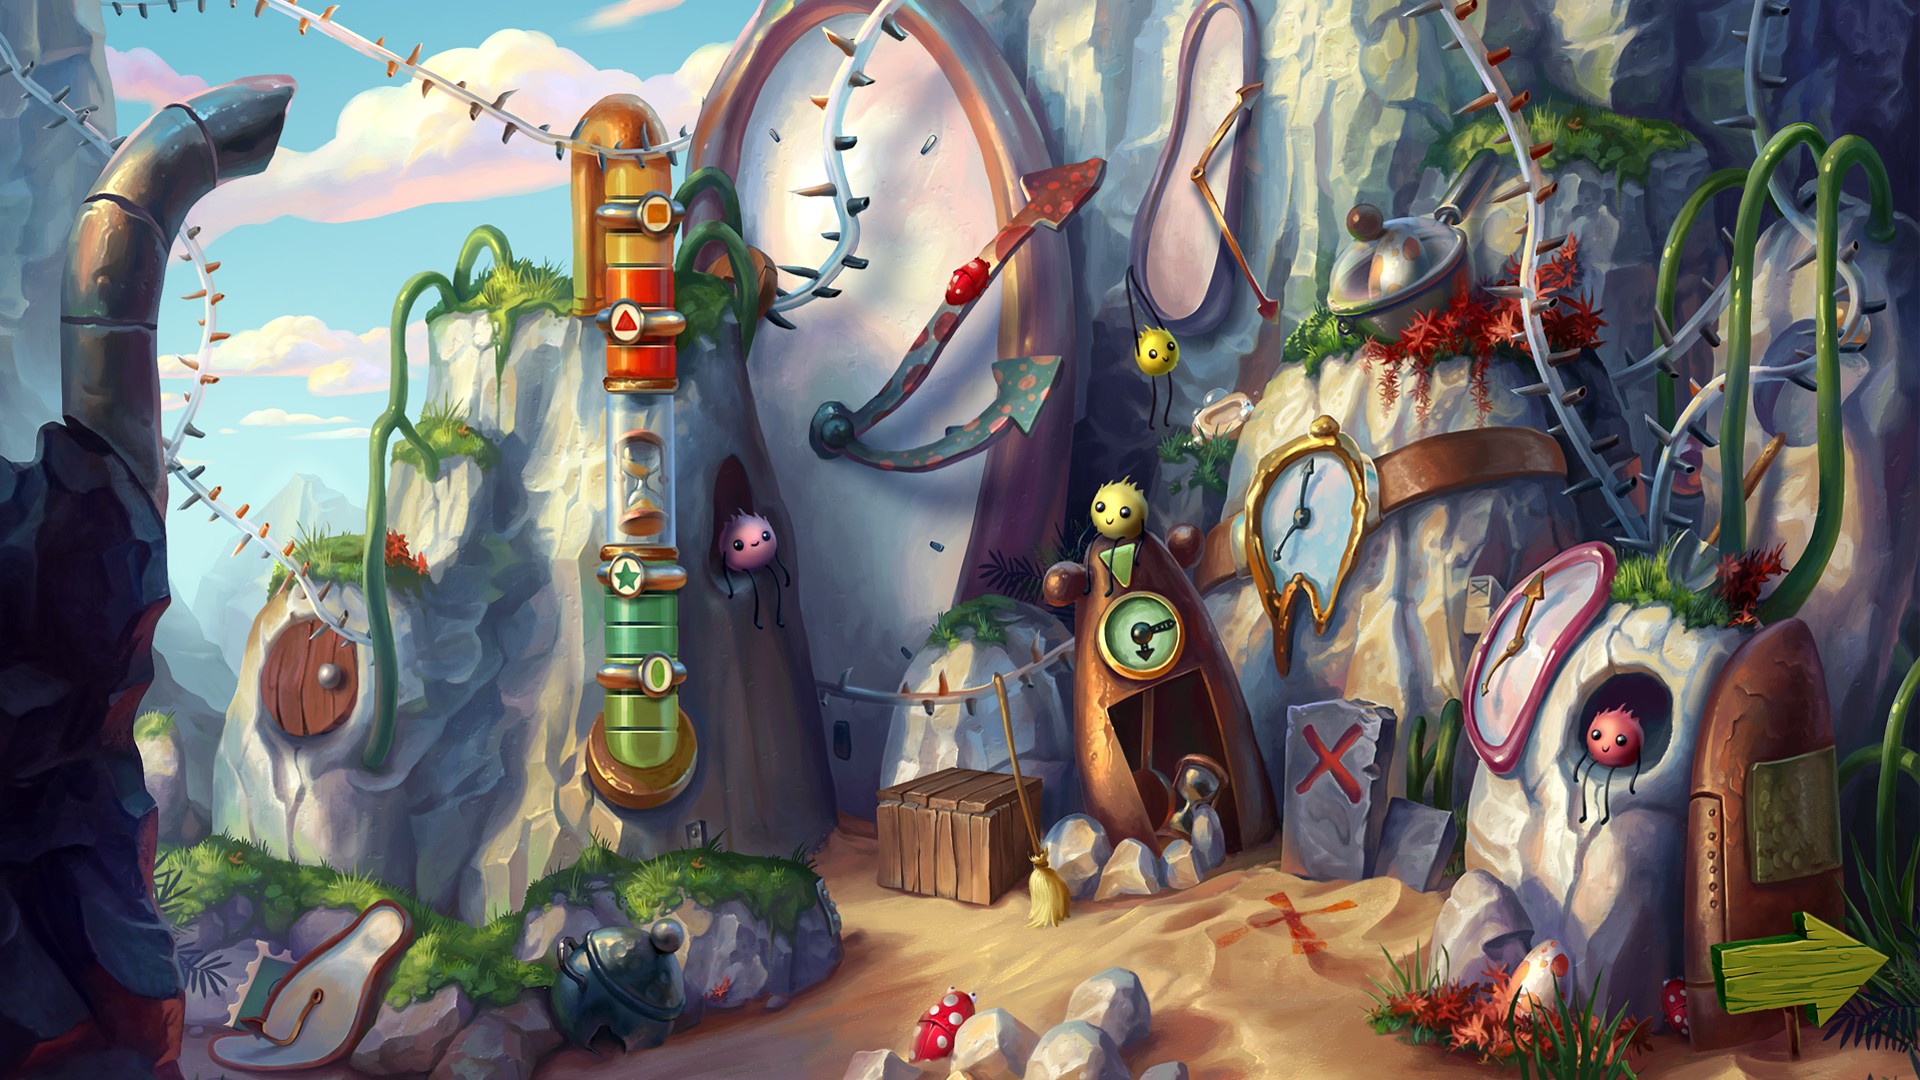 2D, adventure, Artifex Mundi, casual, Hidden Object, indie, My Brother Rabbit, My Brother Rabbit Review, PS4, PS4 Review, Puzzle, Raring 6/10